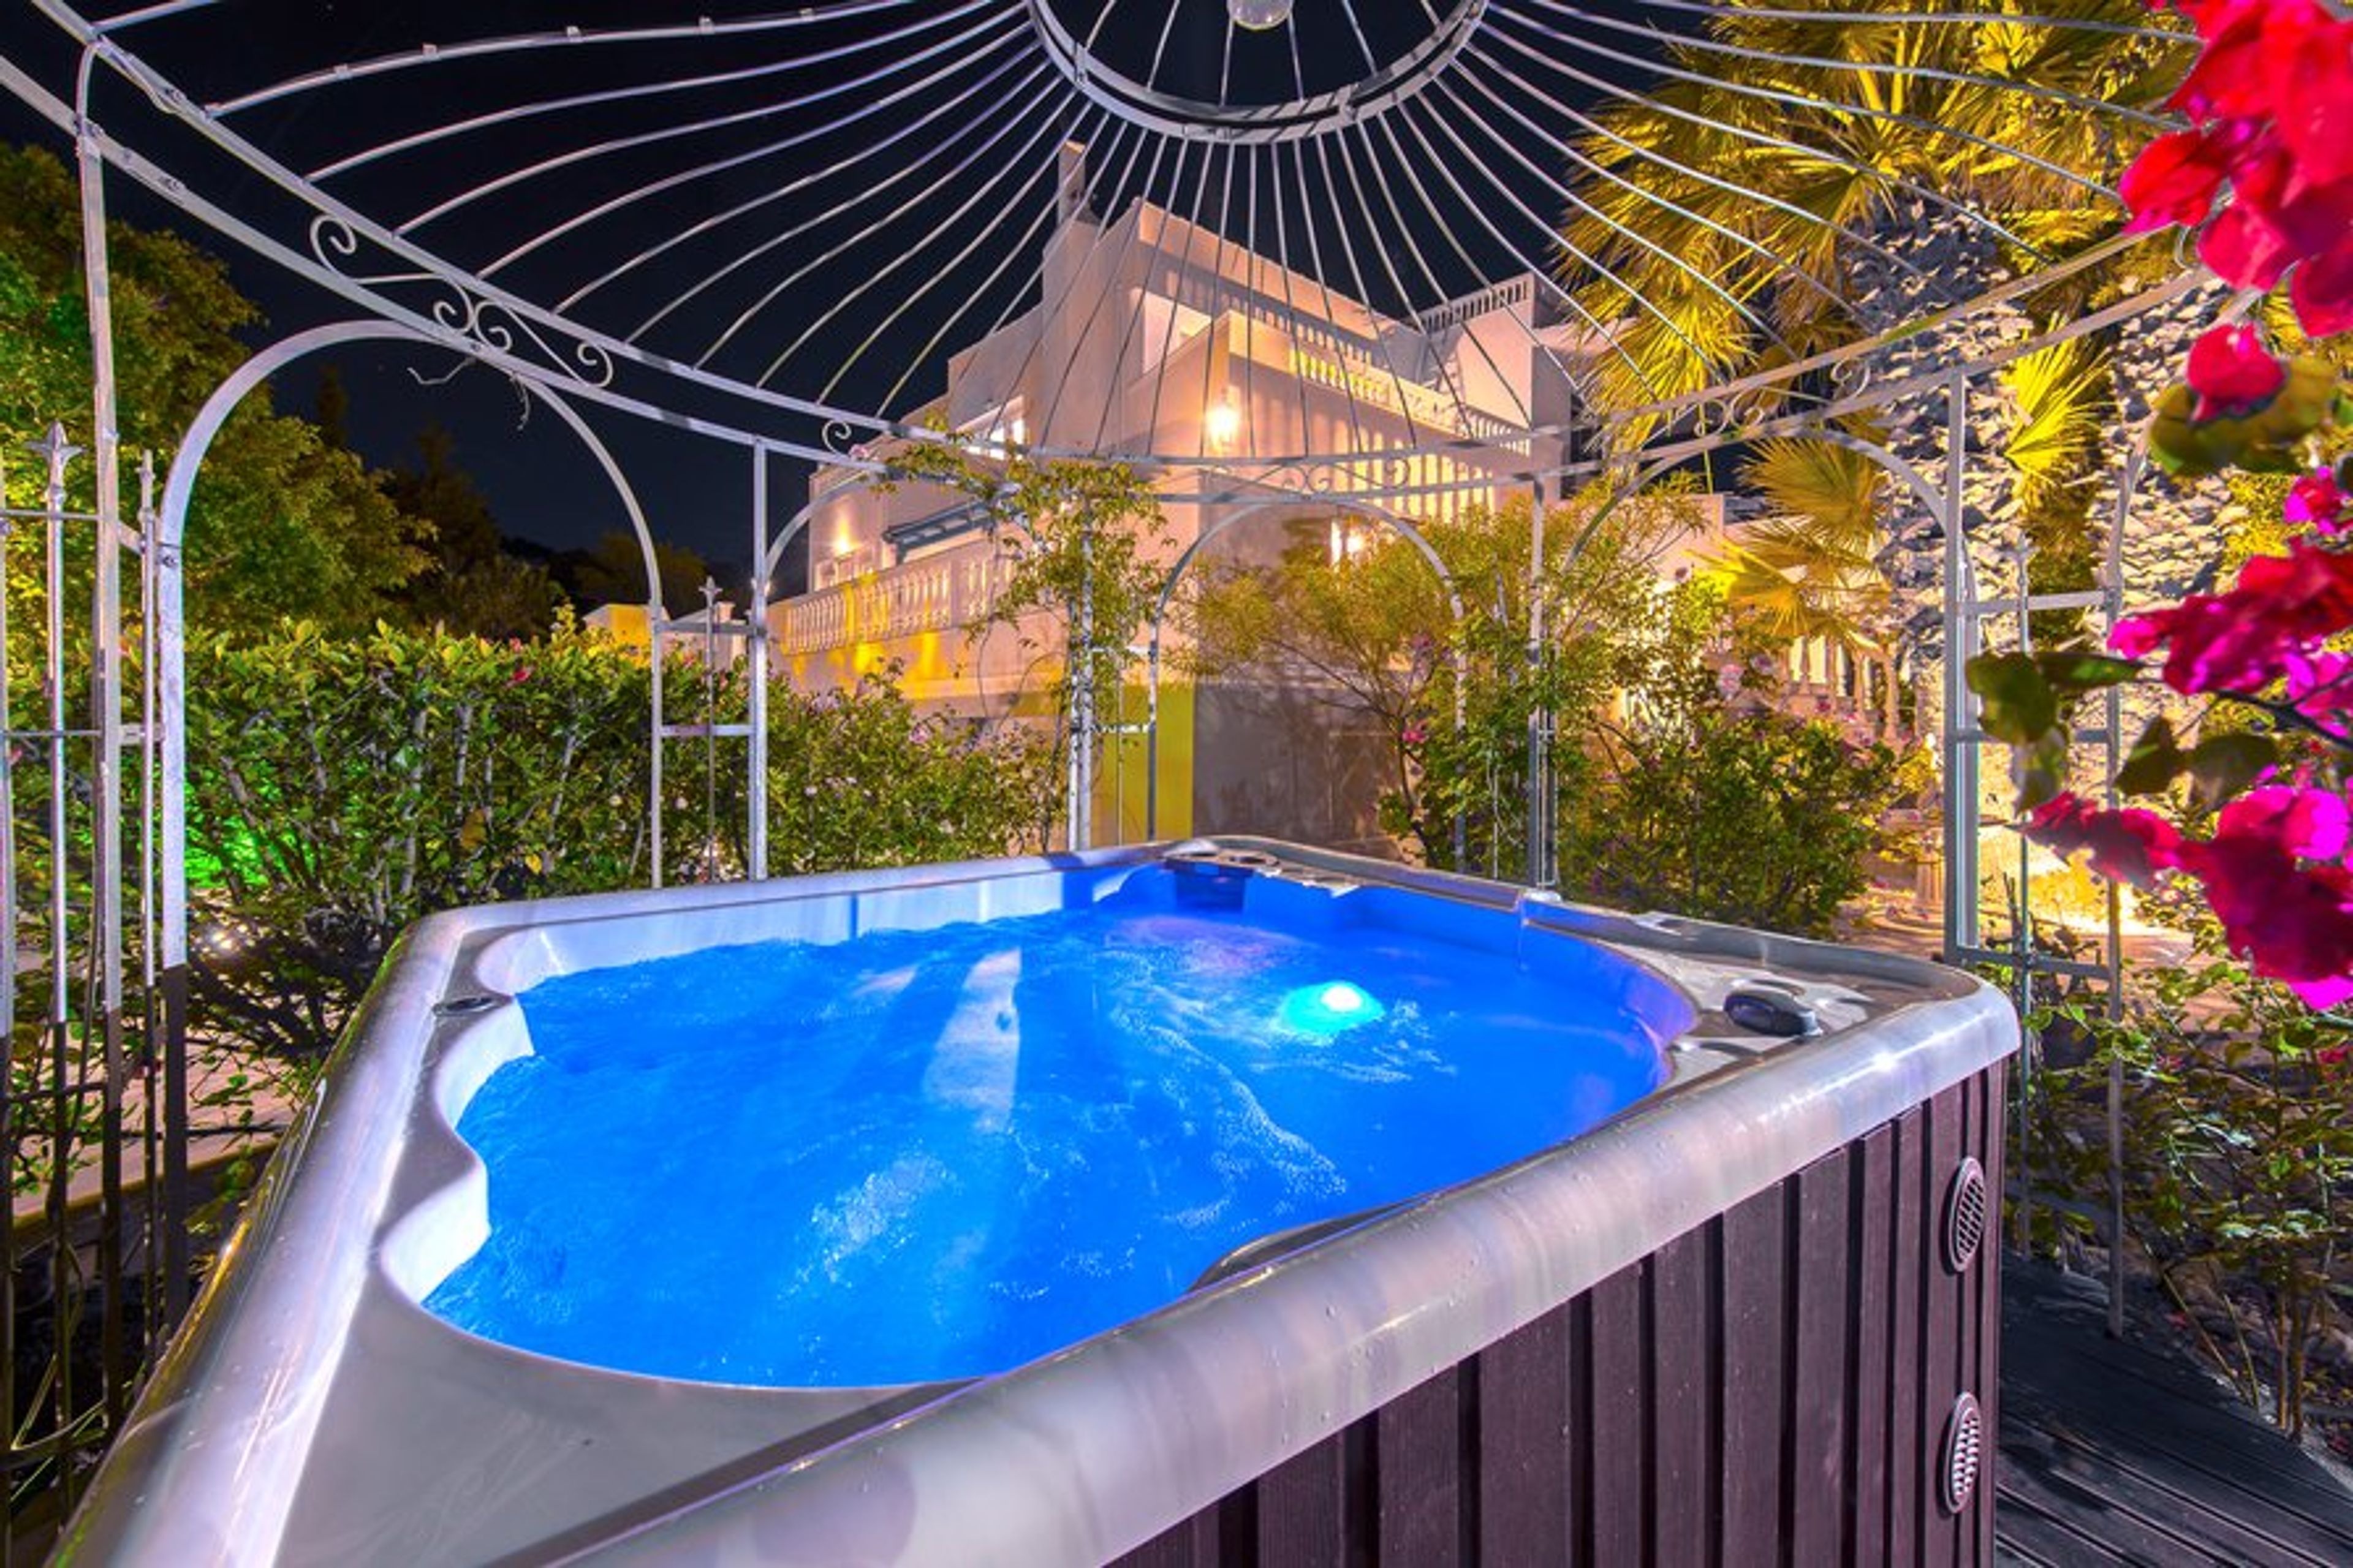 Hot tub – Jacuzzi Ideal for a romantic and relaxing bubble bath  